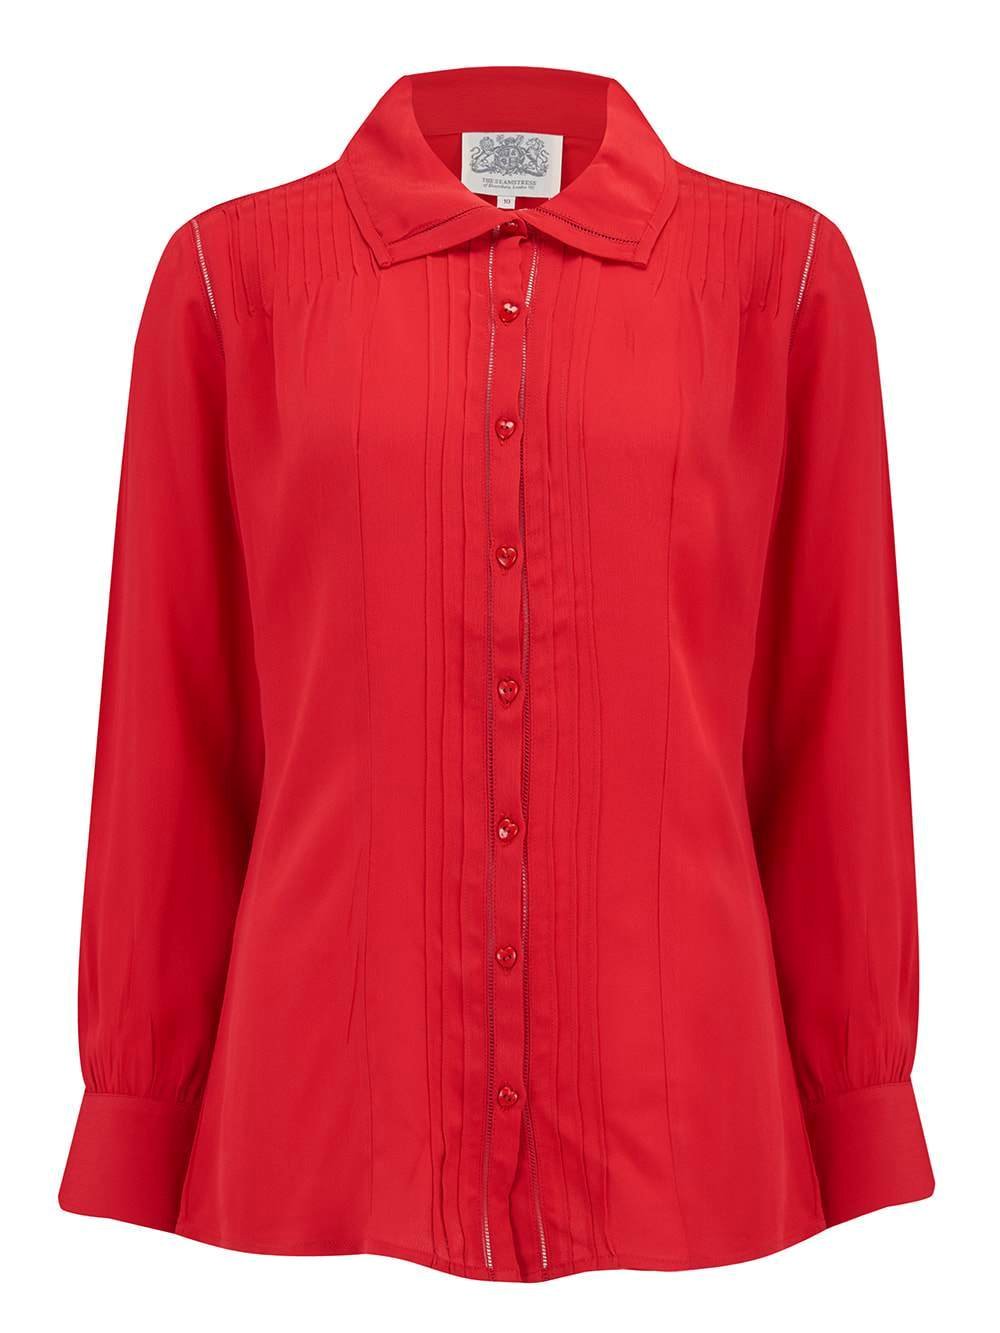 "Alice" Blouse in Red, Authentic & Classic 1940s Vintage Inspired Style - CC41, Goodwood Revival, Twinwood Festival, Viva Las Vegas Rockabilly Weekend Rock n Romance The Seamstress Of Bloomsbury